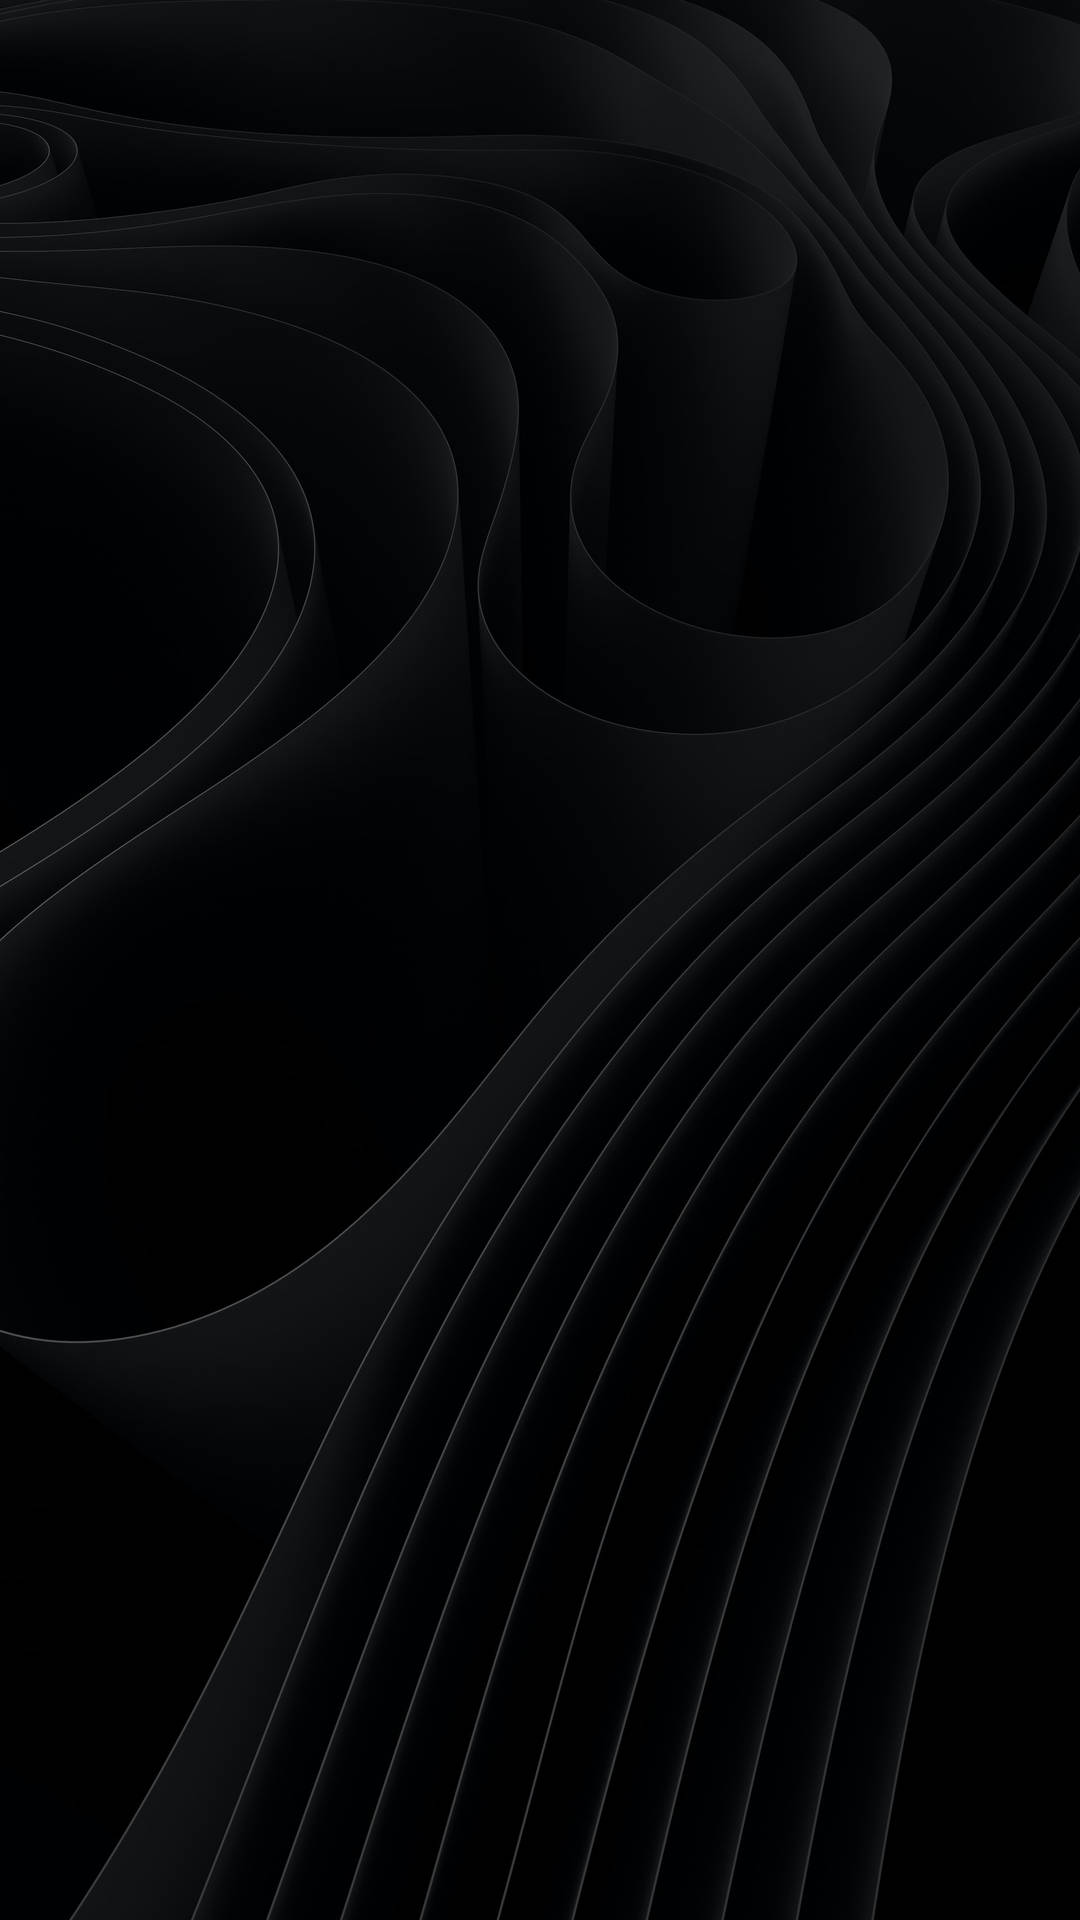 Artistic Paper Quilling Black Aesthetic For An Iphone Tumblr Wallpaper